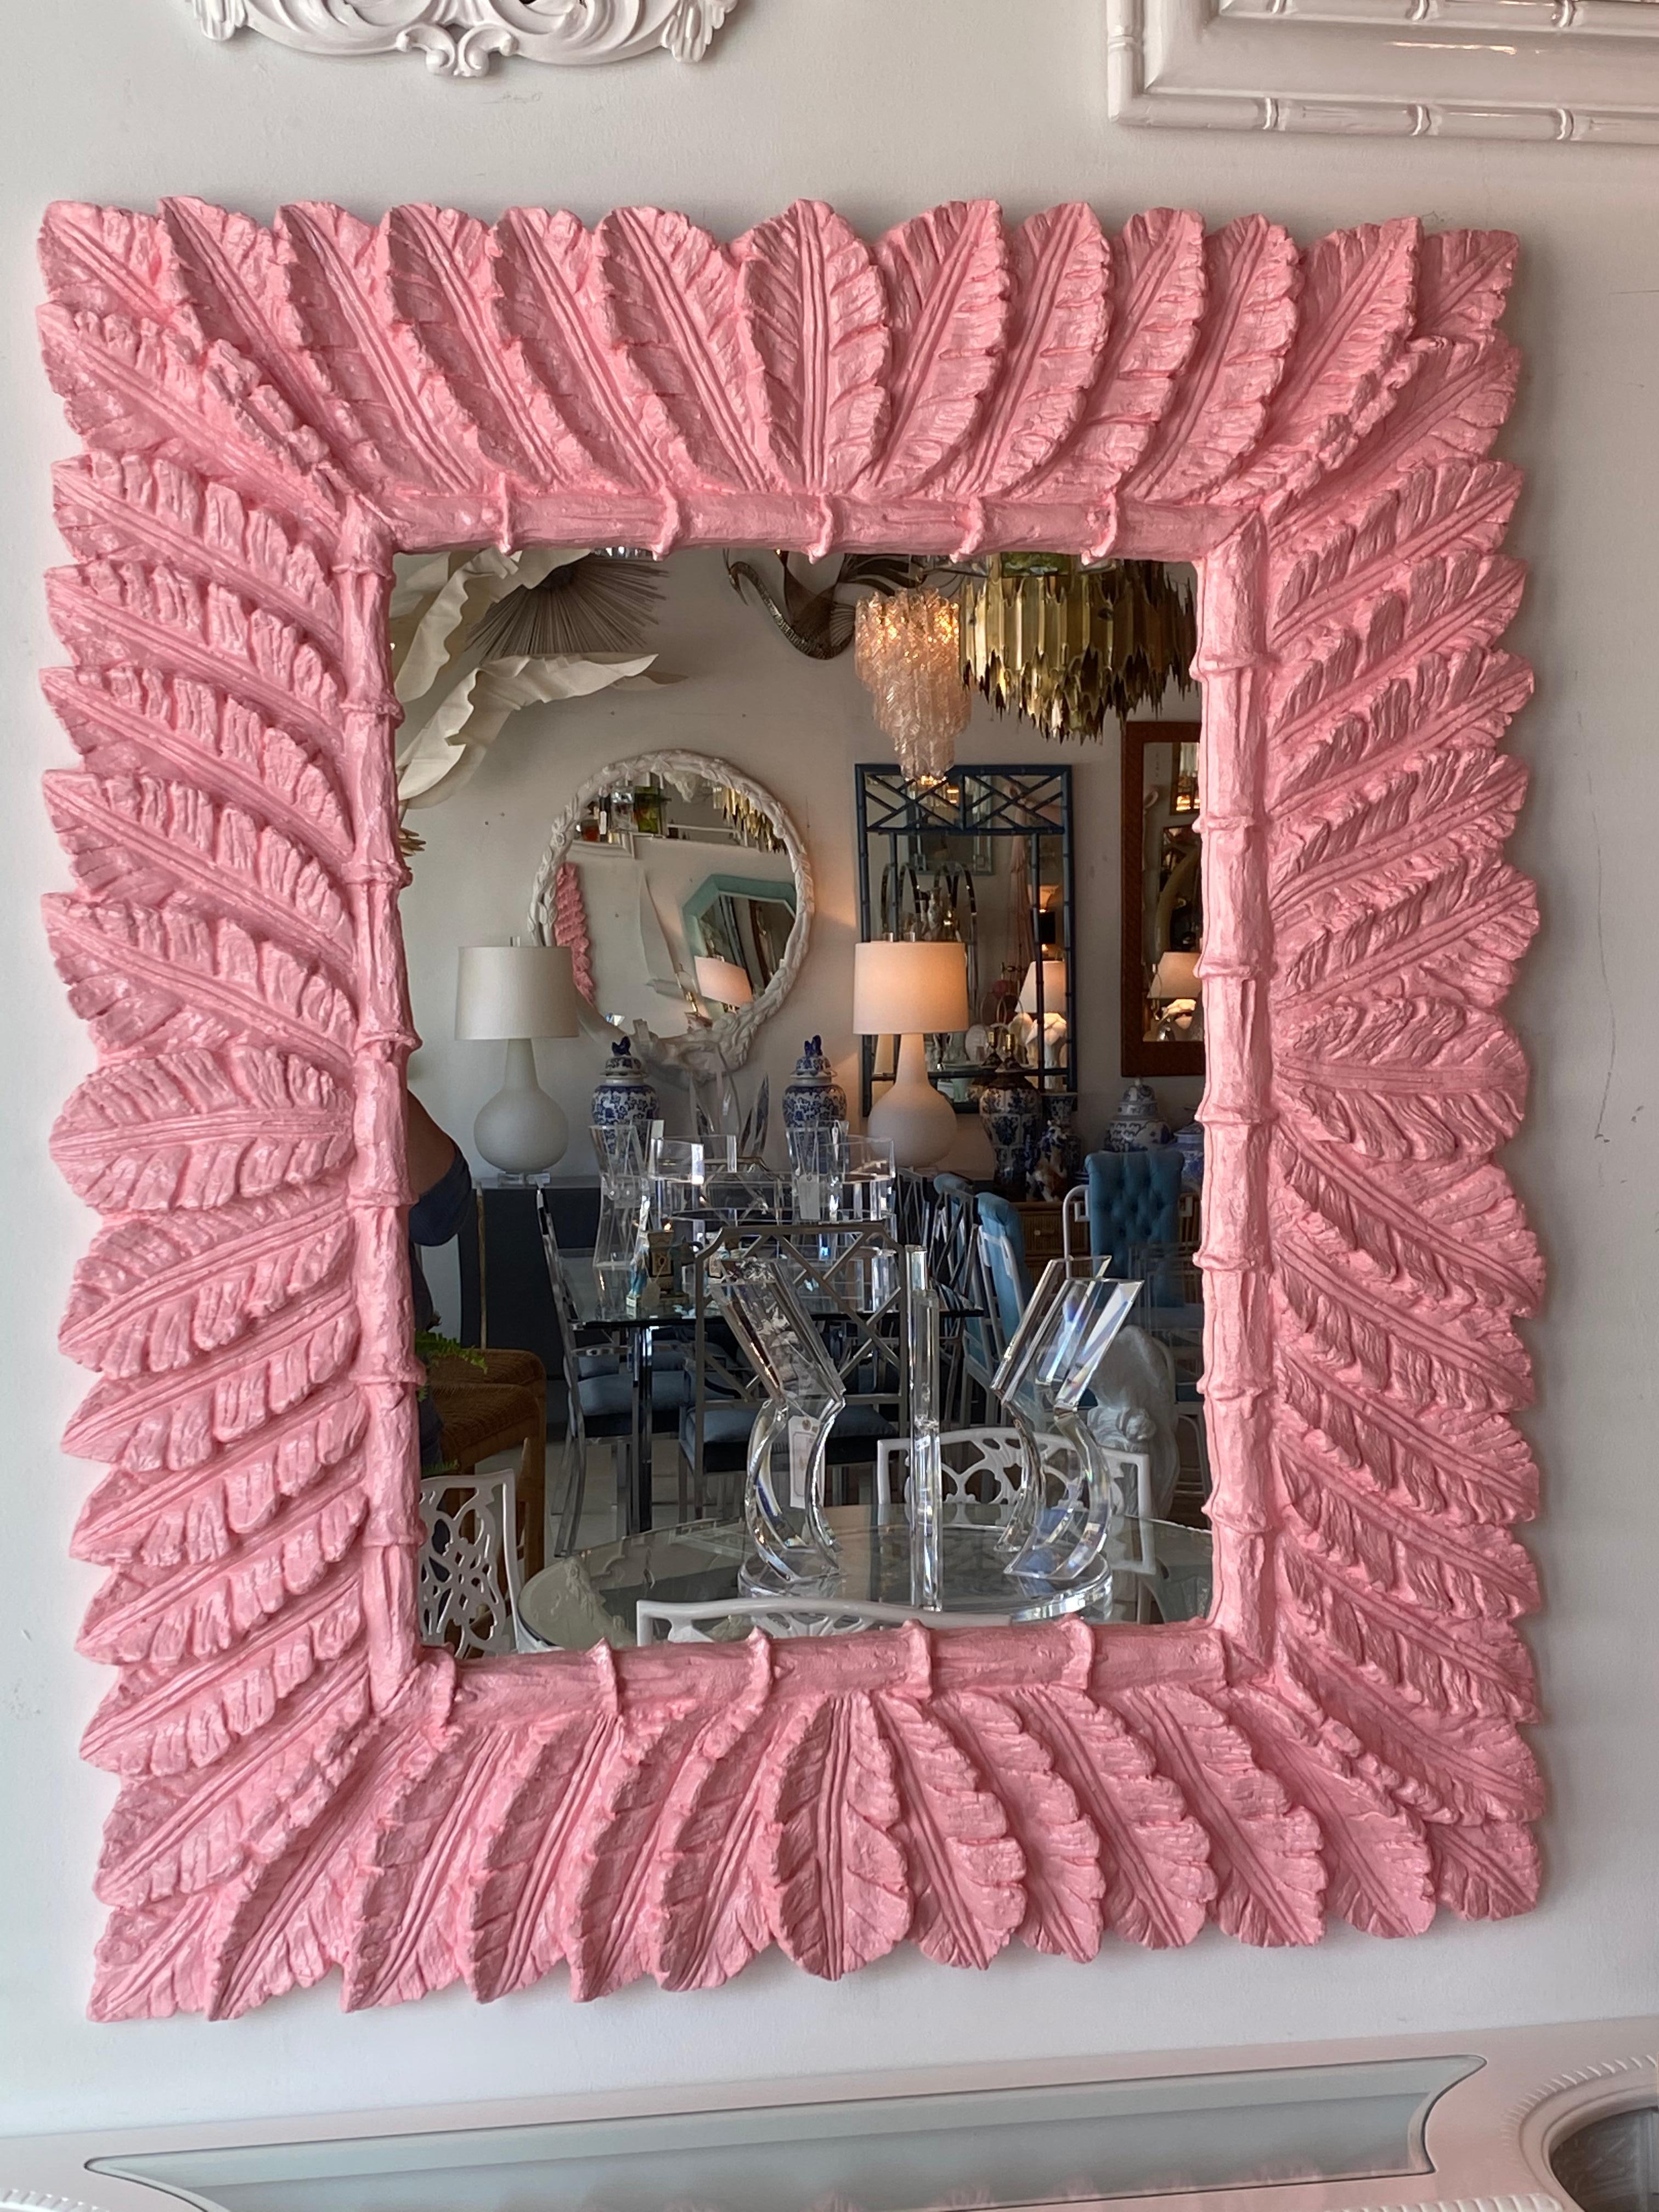 Lovely vintage wall mirror lacquered in a pretty coral pink. Comes ready to hang. No chips or breaks.